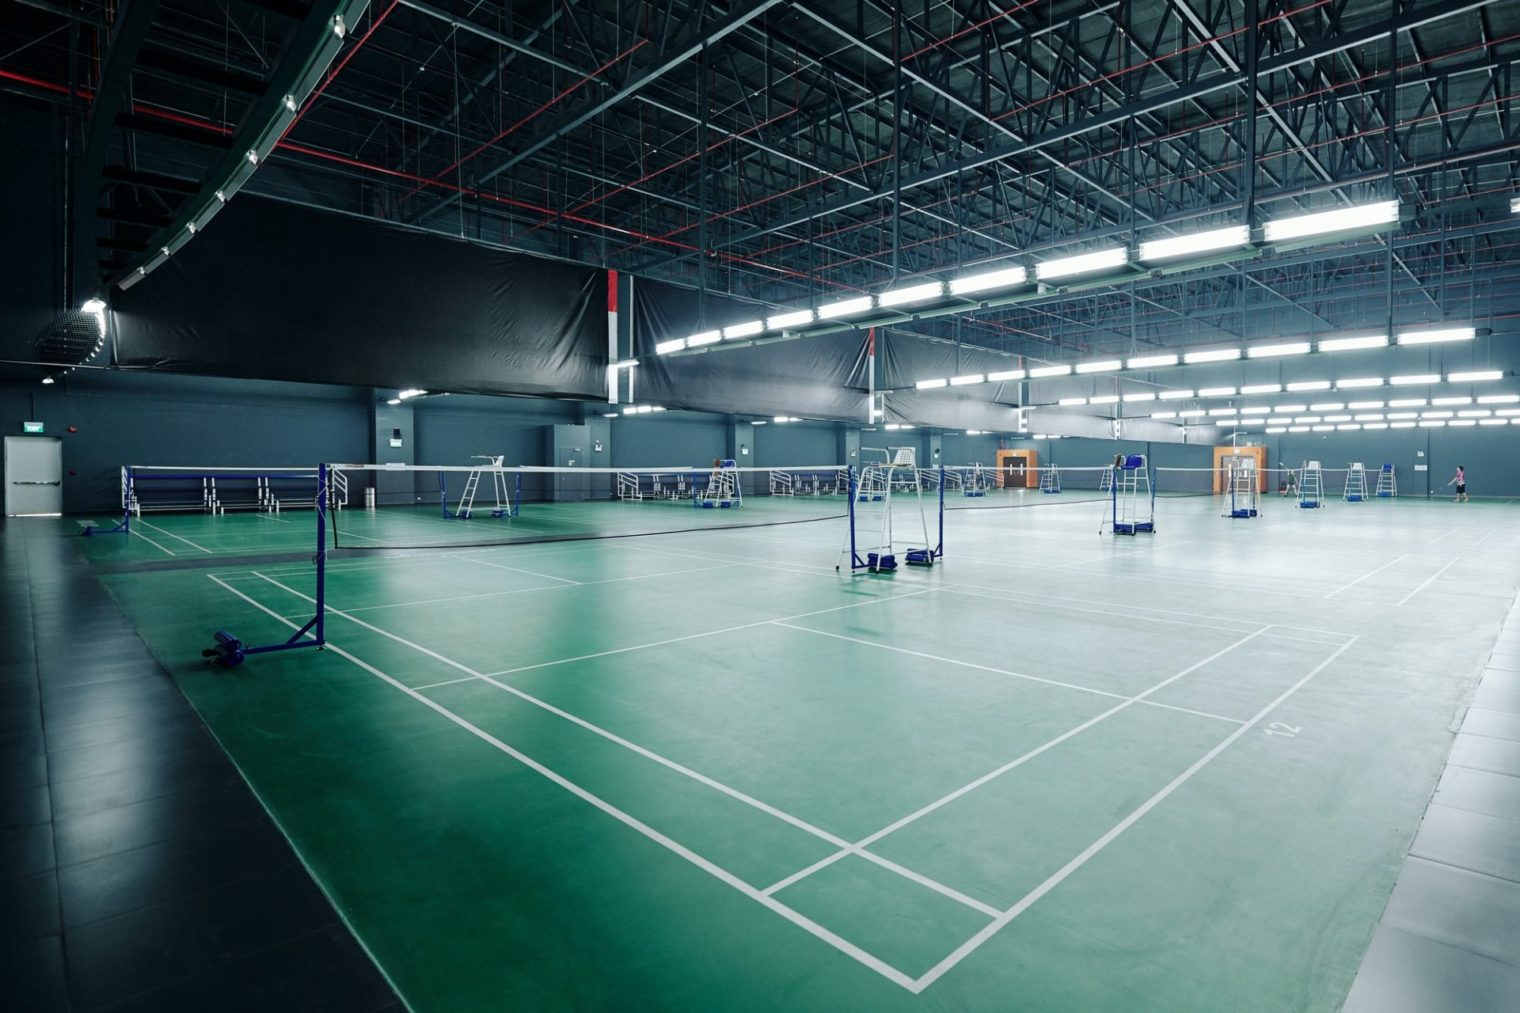 Courts for playing tennis and badminton